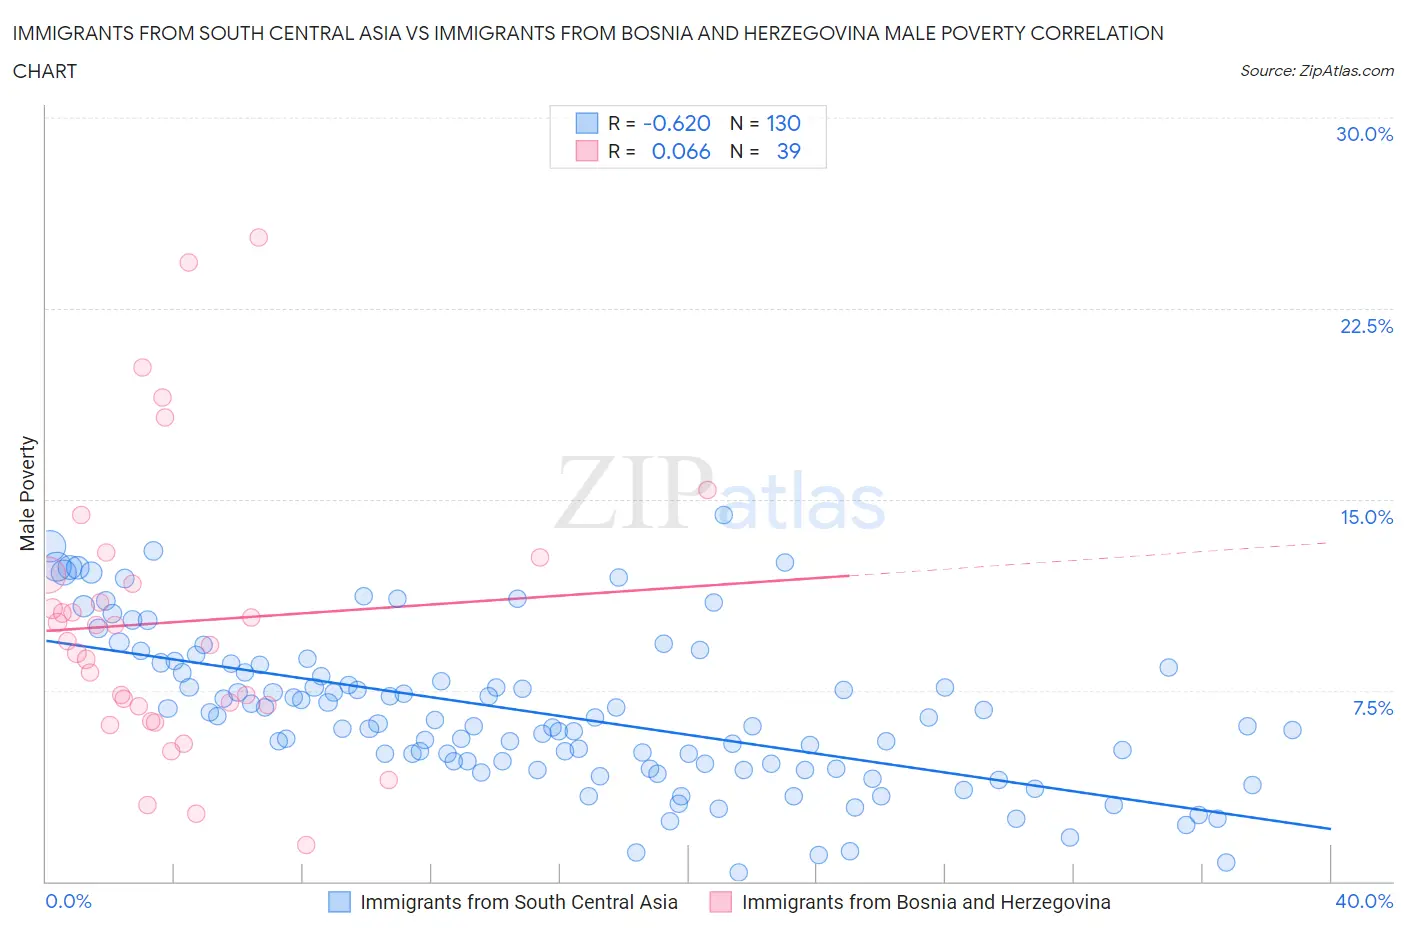 Immigrants from South Central Asia vs Immigrants from Bosnia and Herzegovina Male Poverty